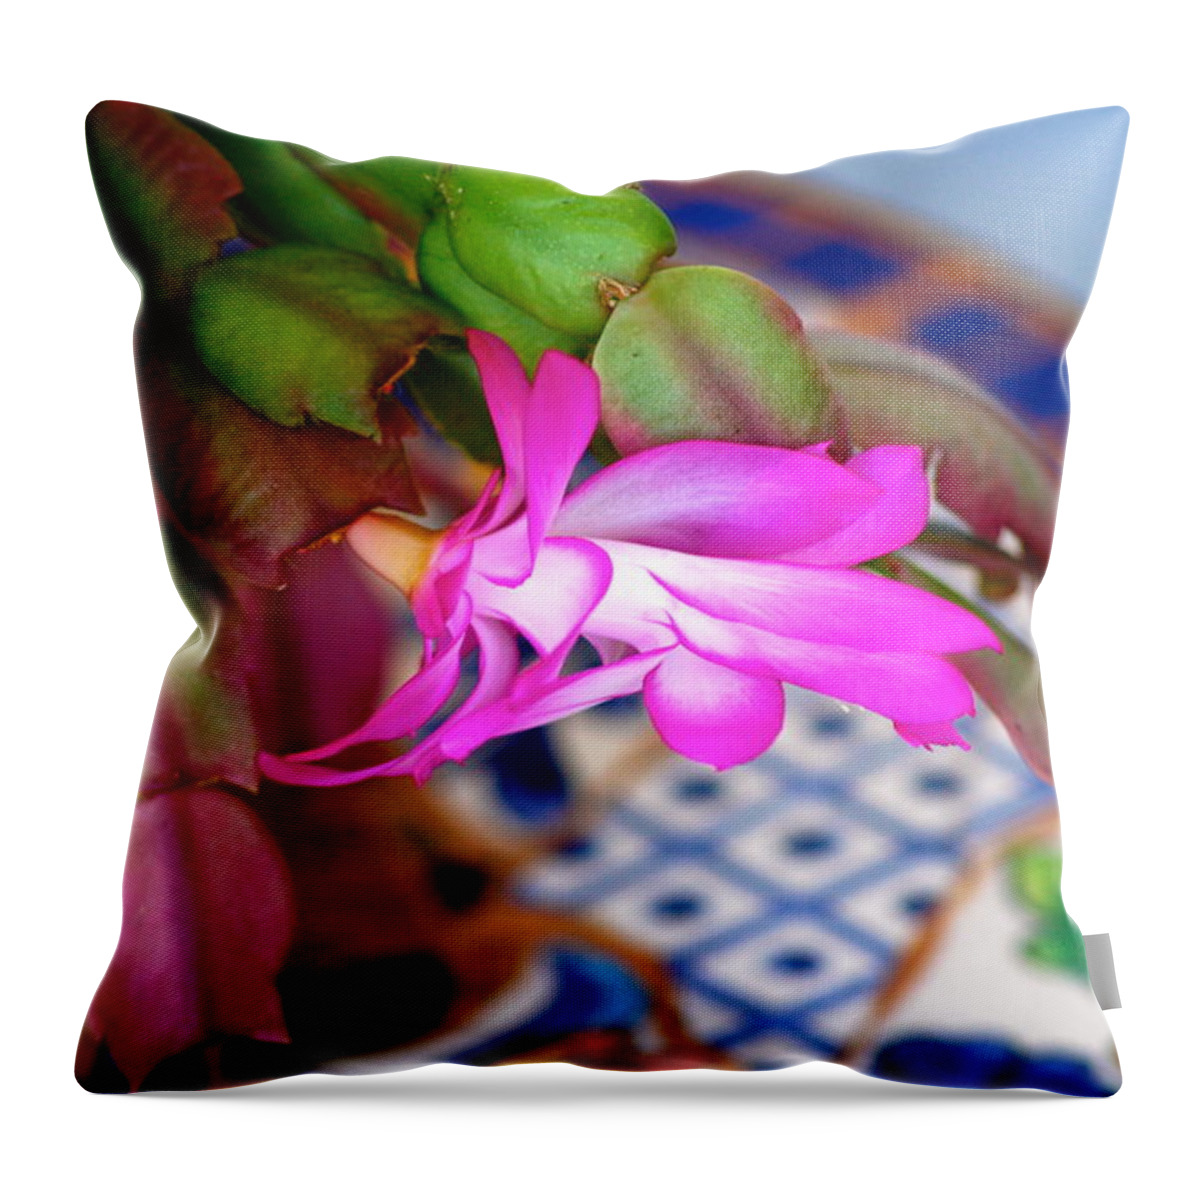 Plants Throw Pillow featuring the photograph Christmas Cactus by Lehua Pekelo-Stearns